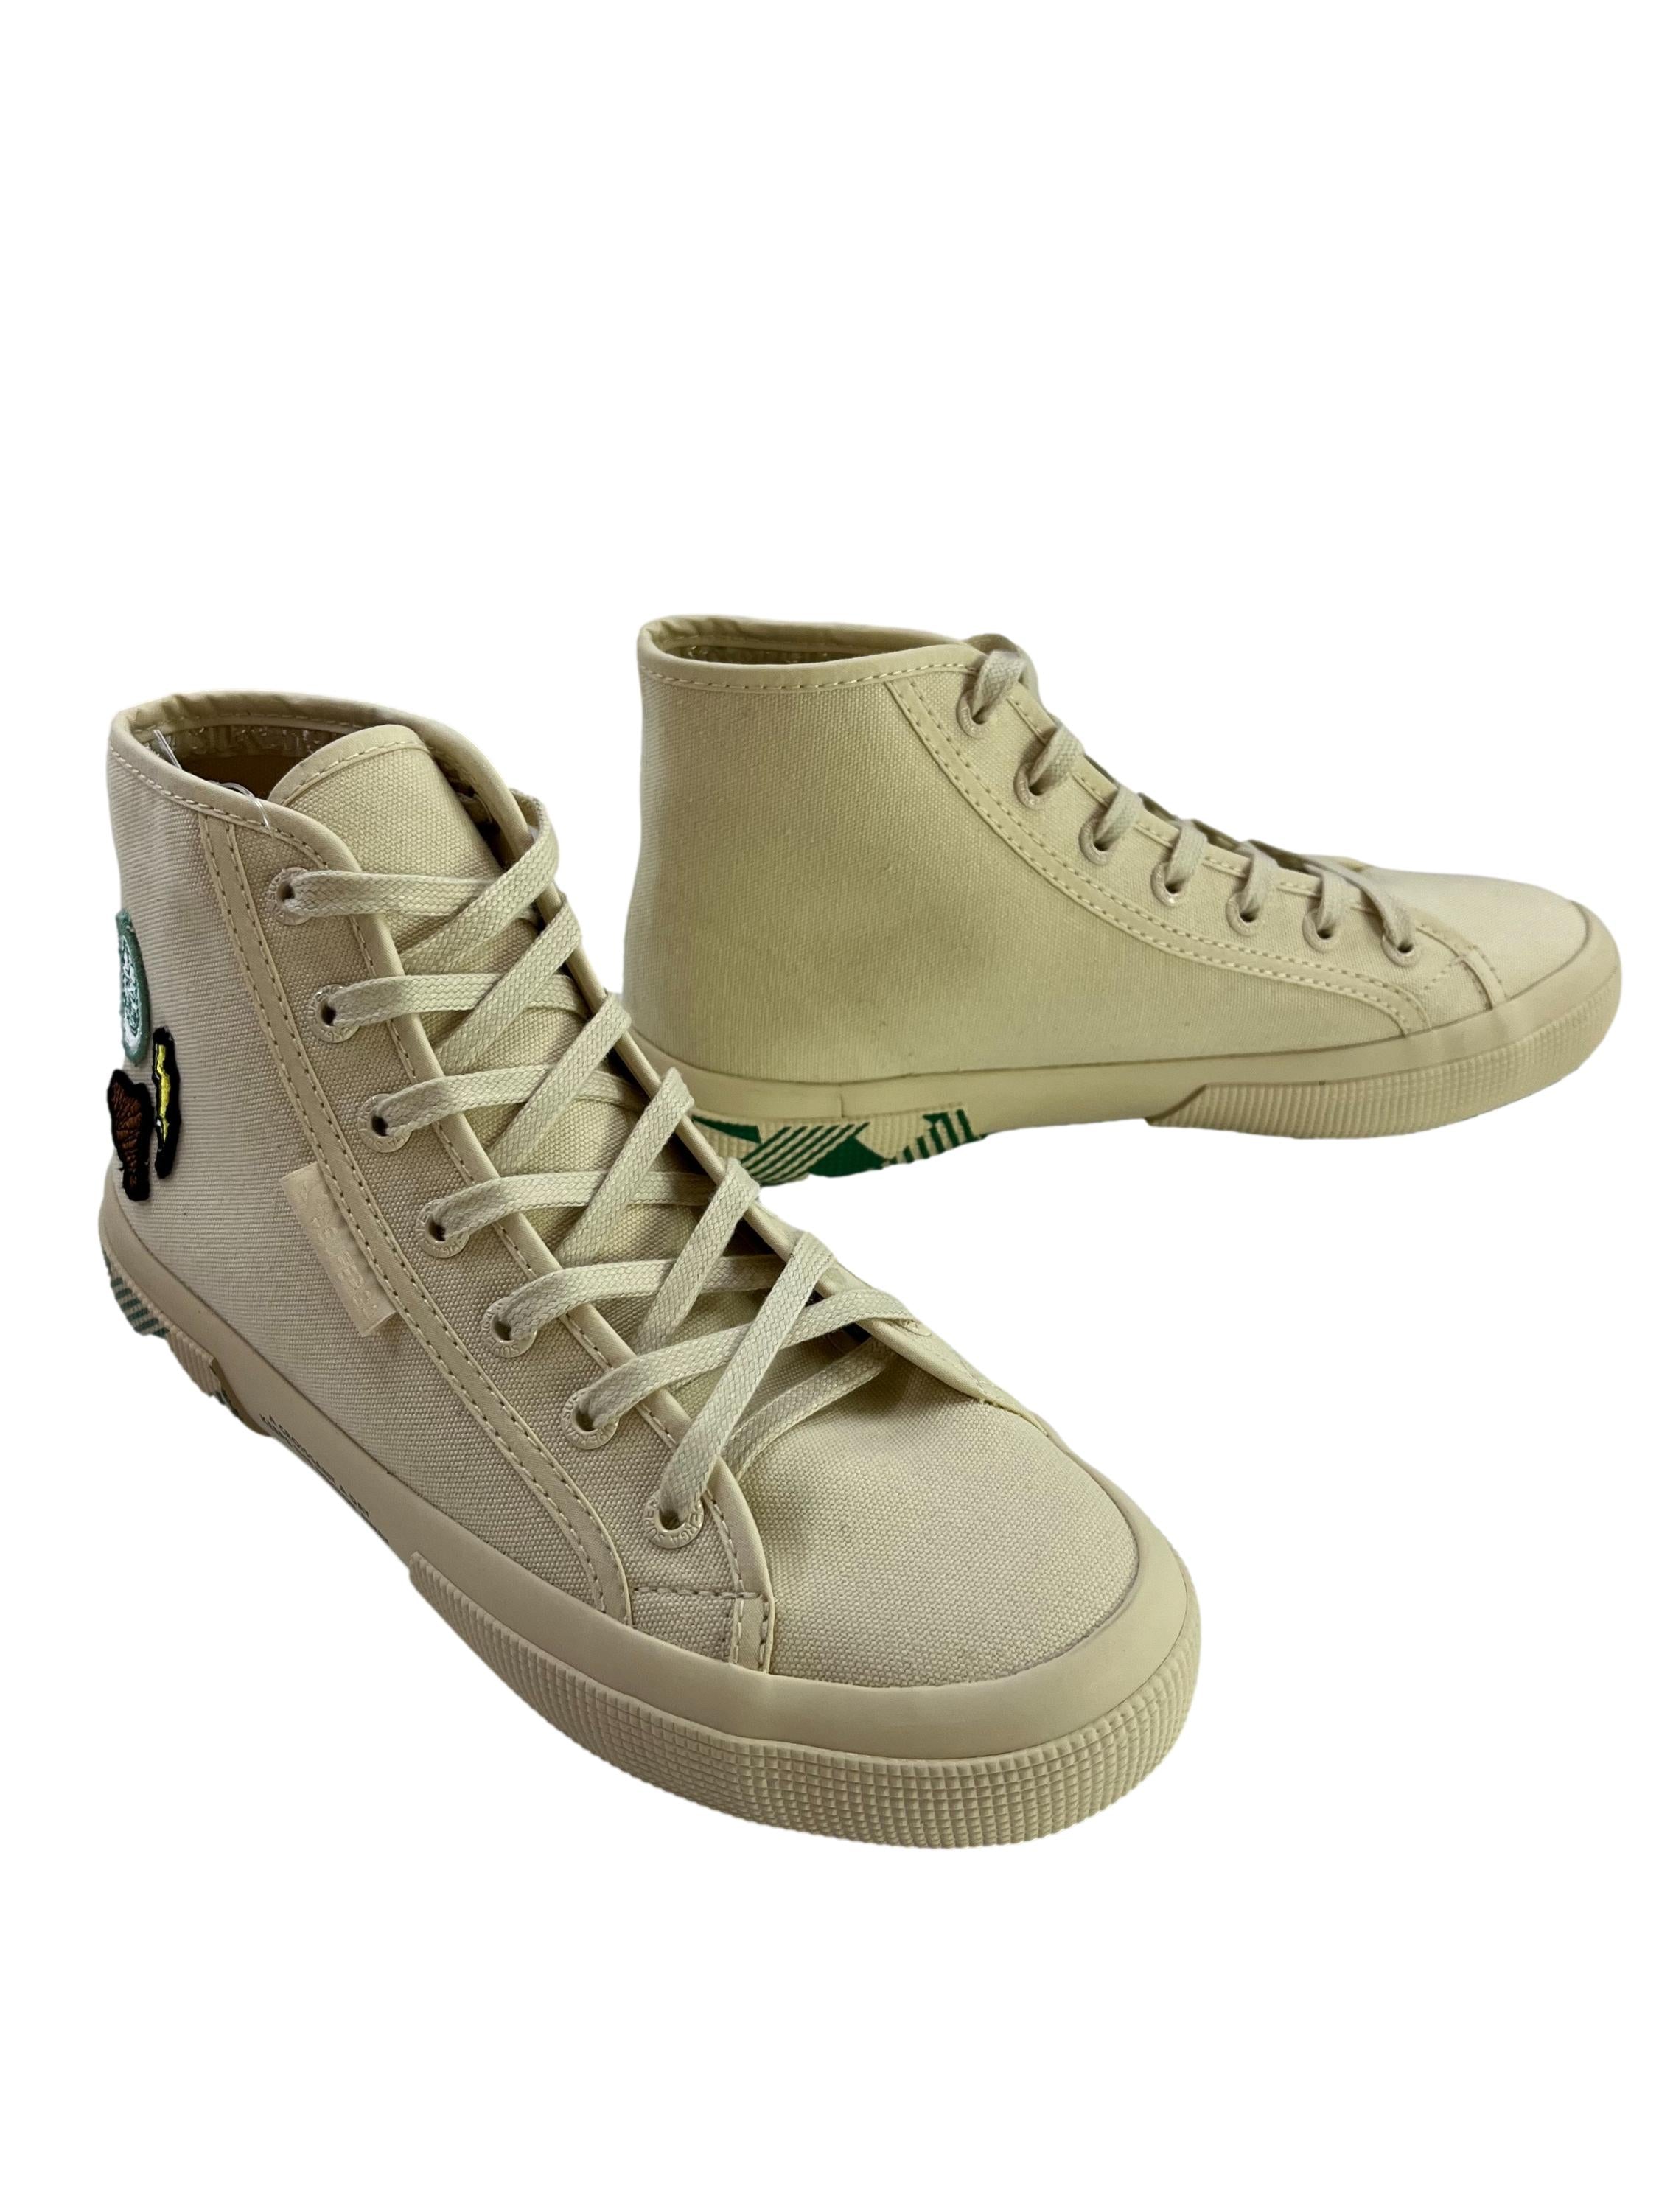 Antique White Green 2795 Embroidery Patches High Cut Sneakers